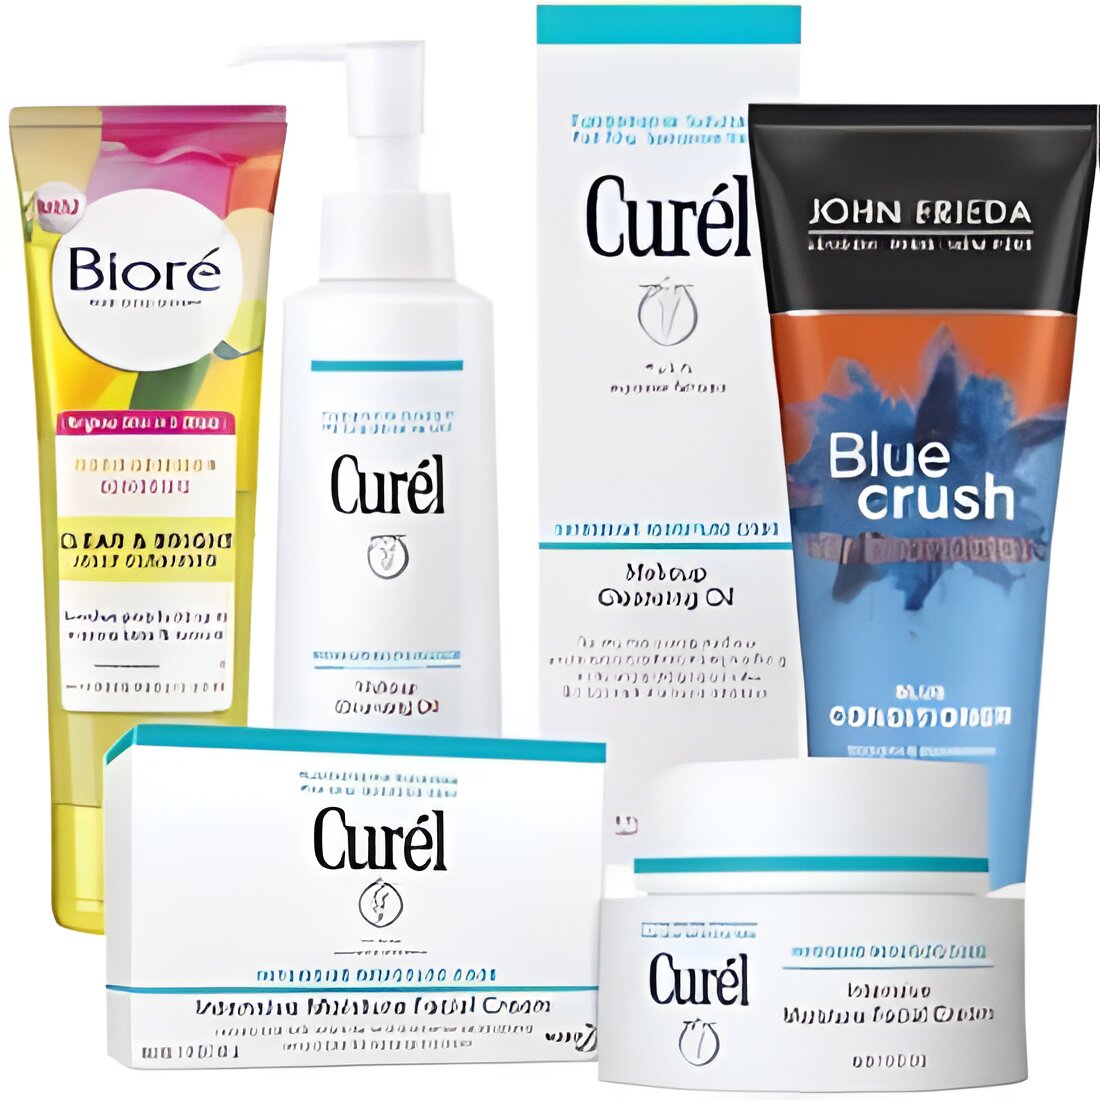 Free John Frieda, Curel, and Biore Products